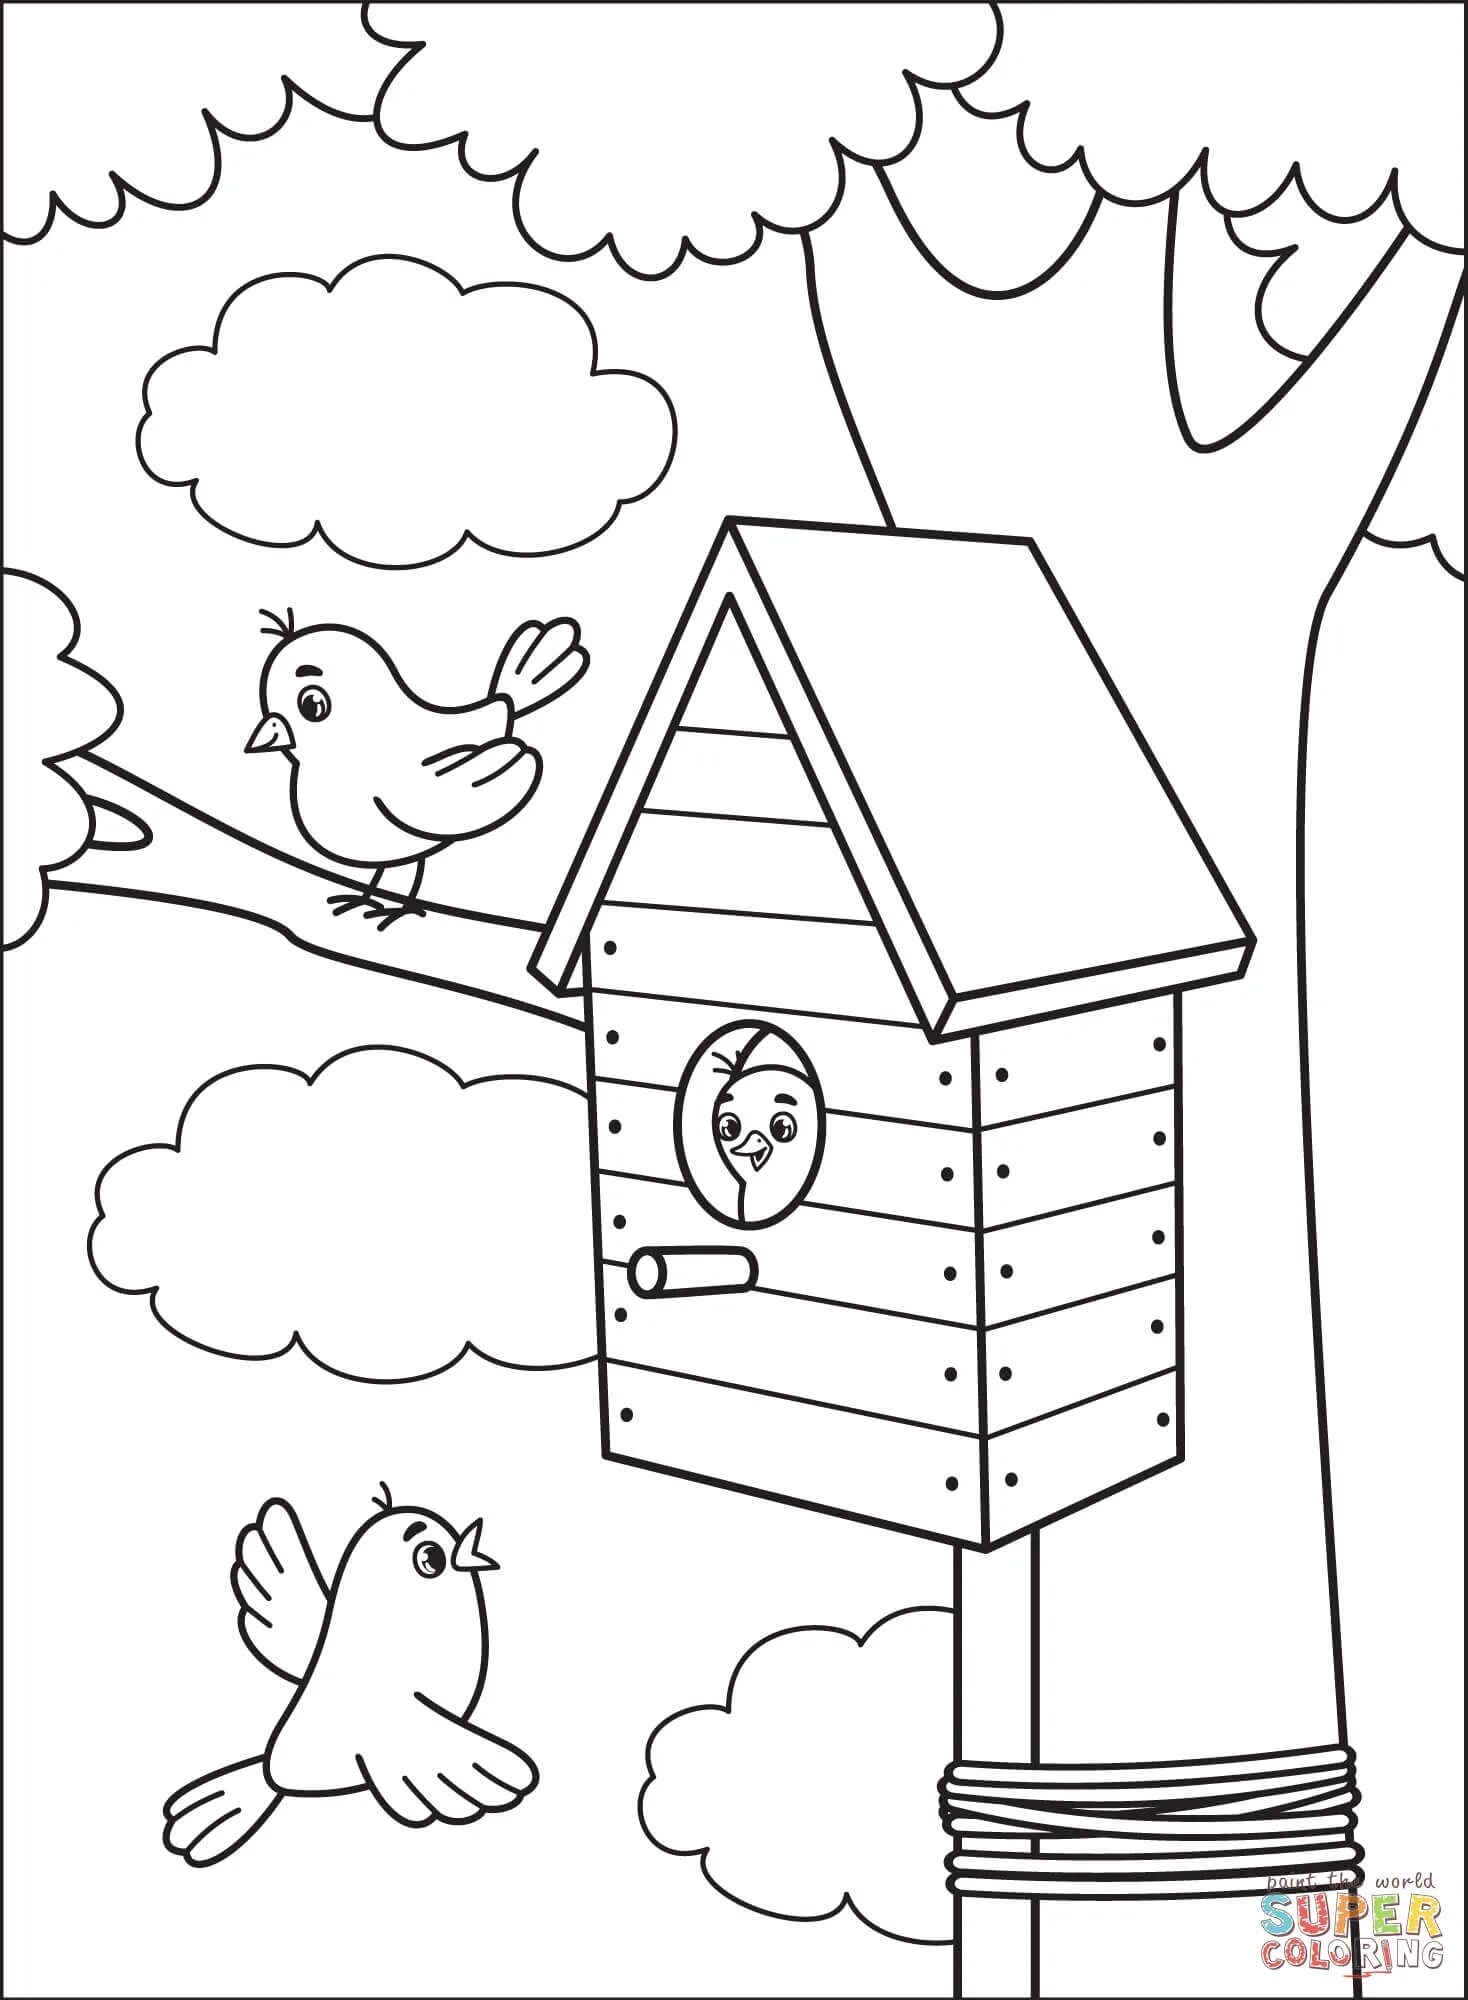 Great birdhouse coloring book for toddlers 3-4